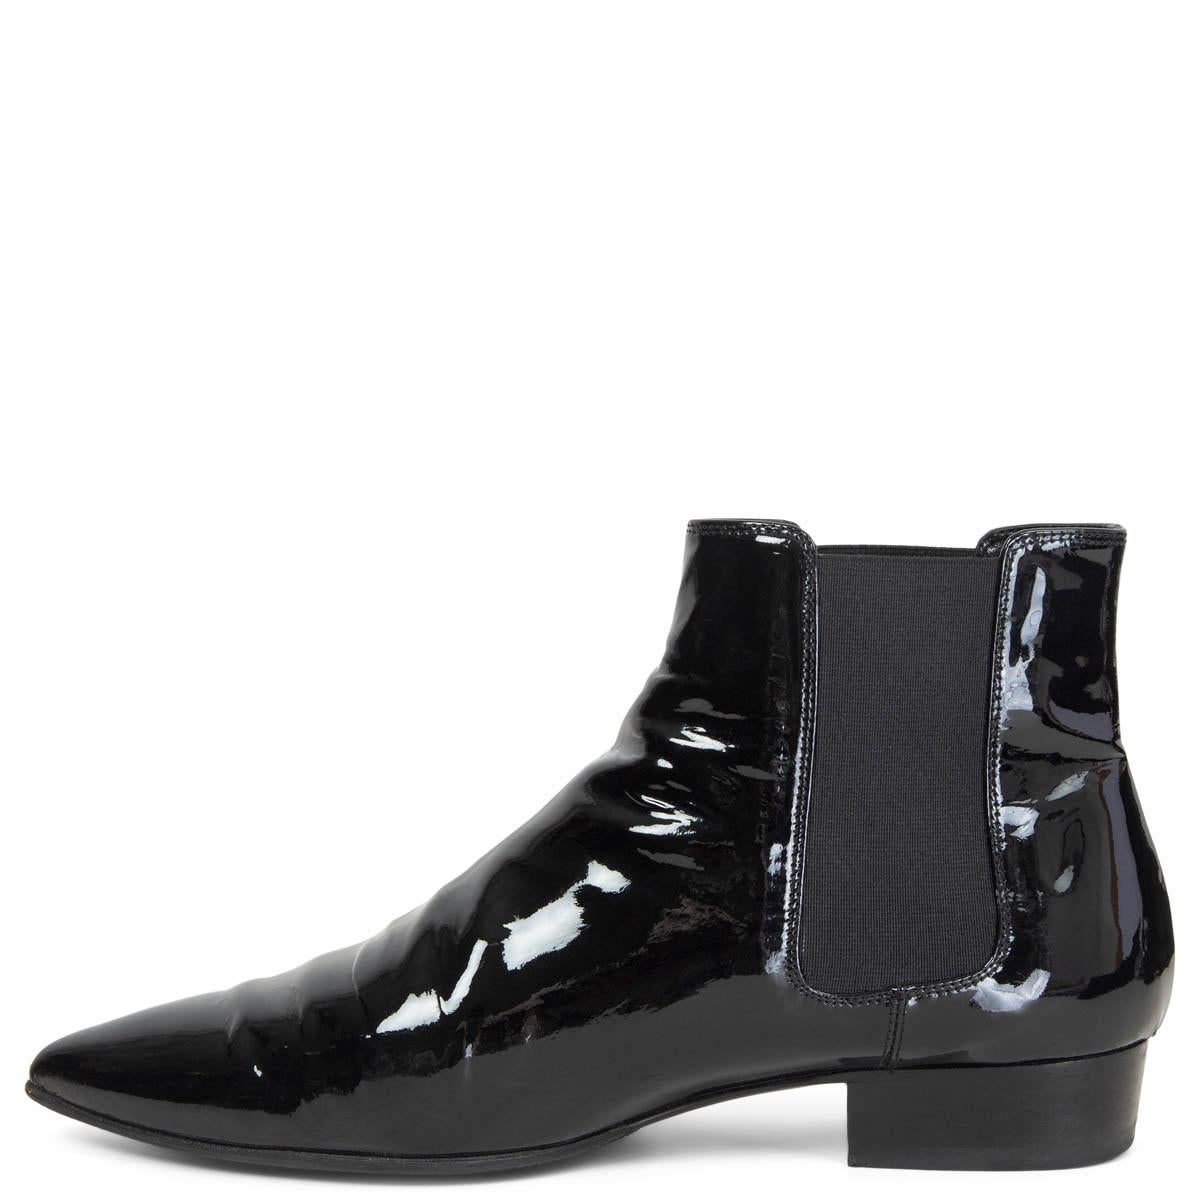 mens patent leather chelsea boots